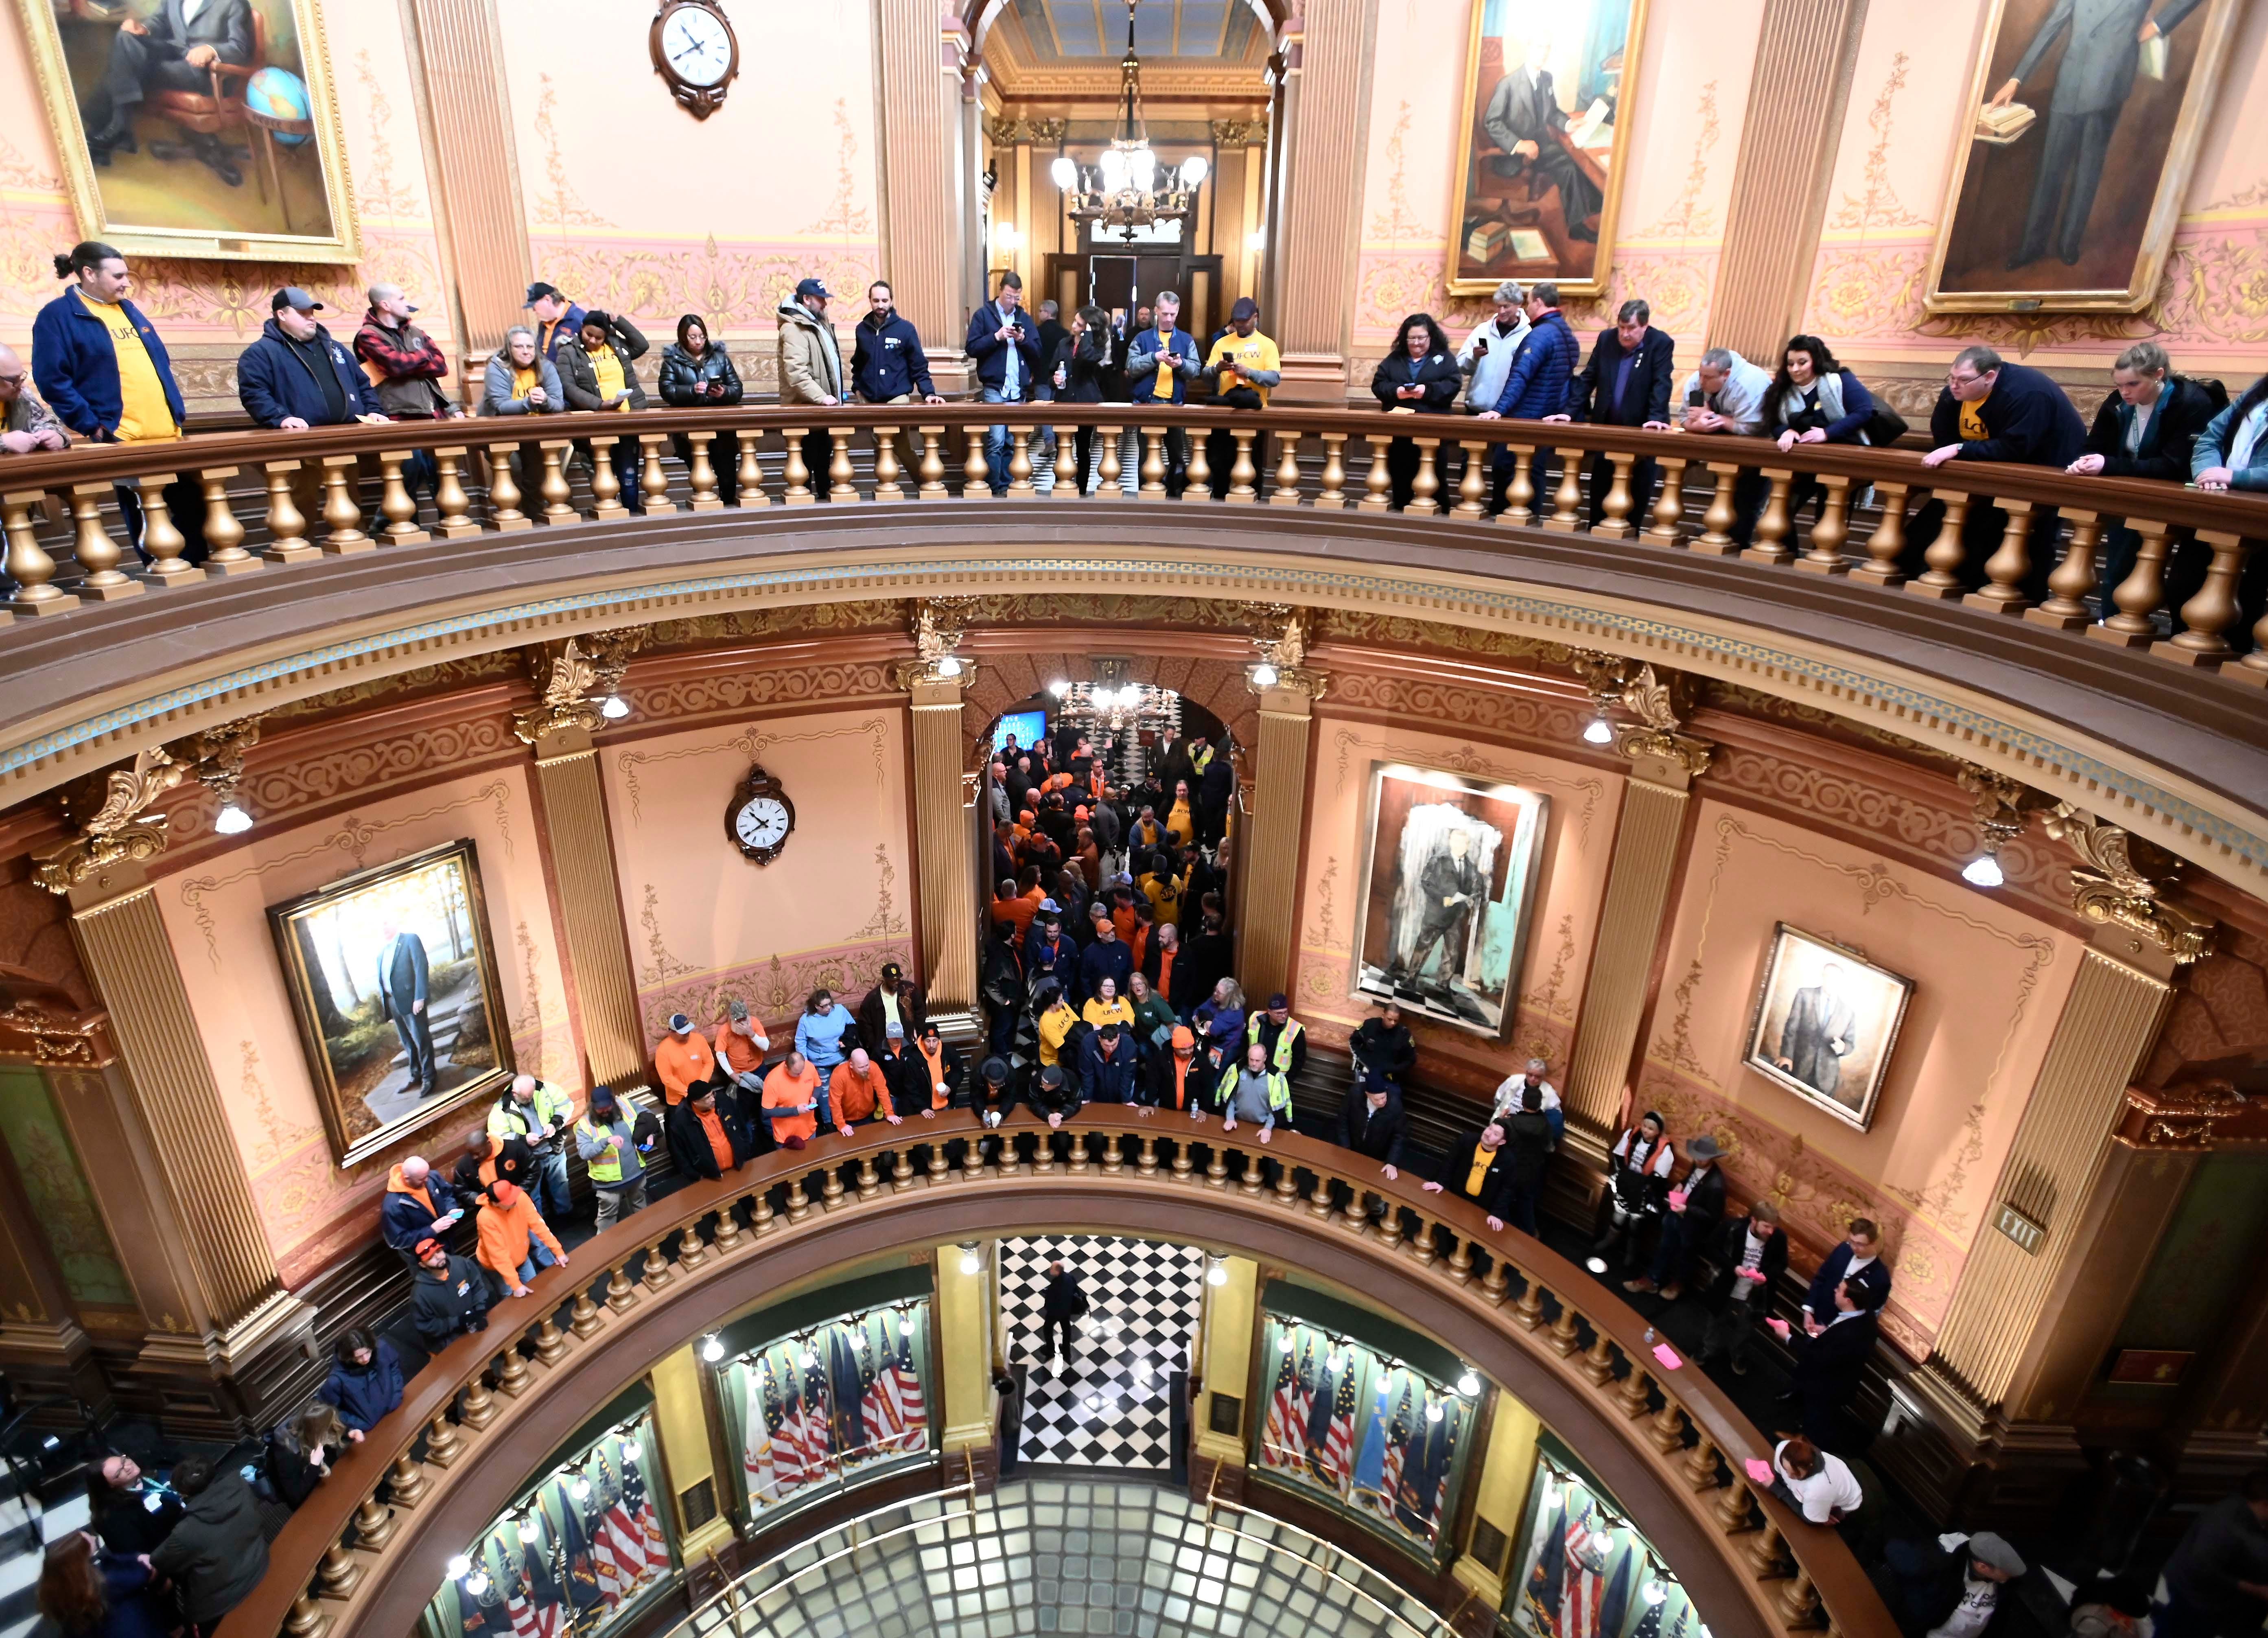 Union members and supporters chant in the Capitol rotunda, Tuesday morning, March 14, 2023, as they wait for a Right To Work bill to be voted on.